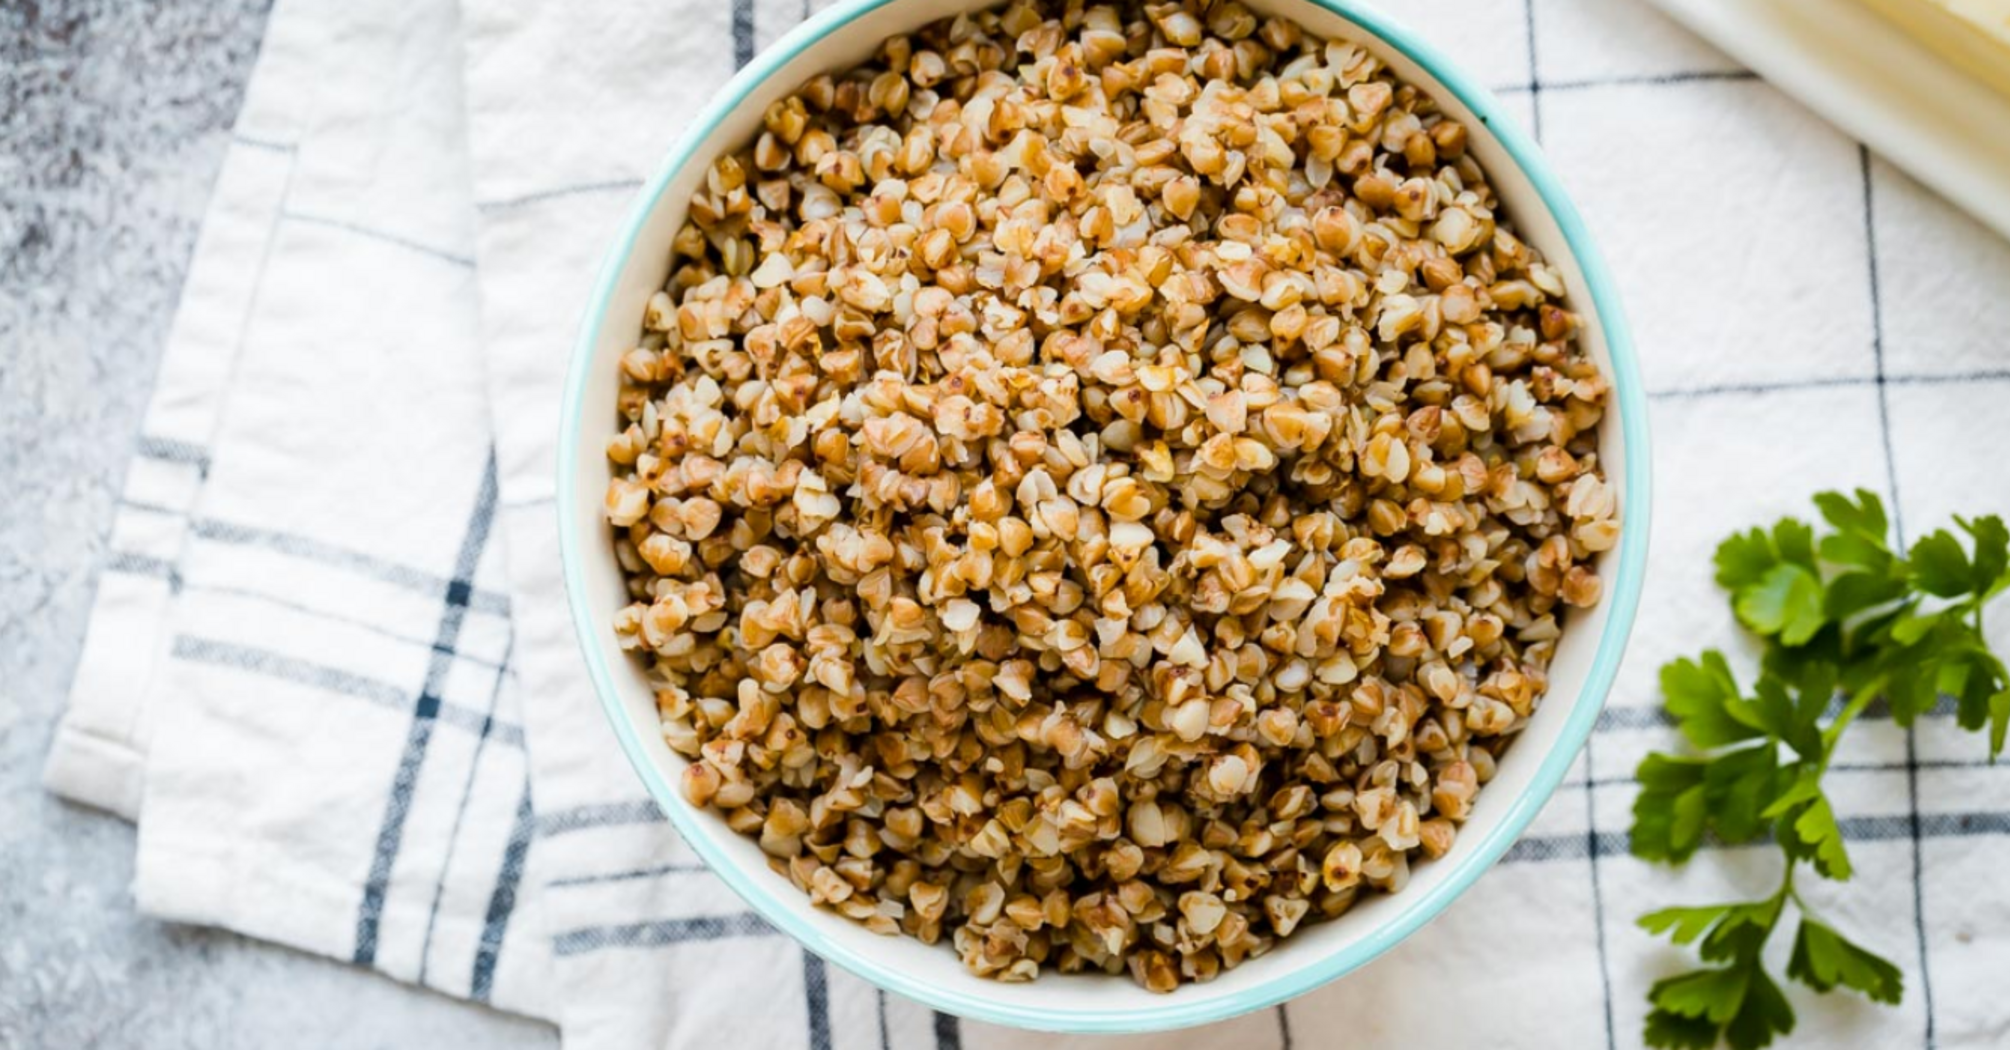 What to add to buckwheat to bring out the flavor in a new way